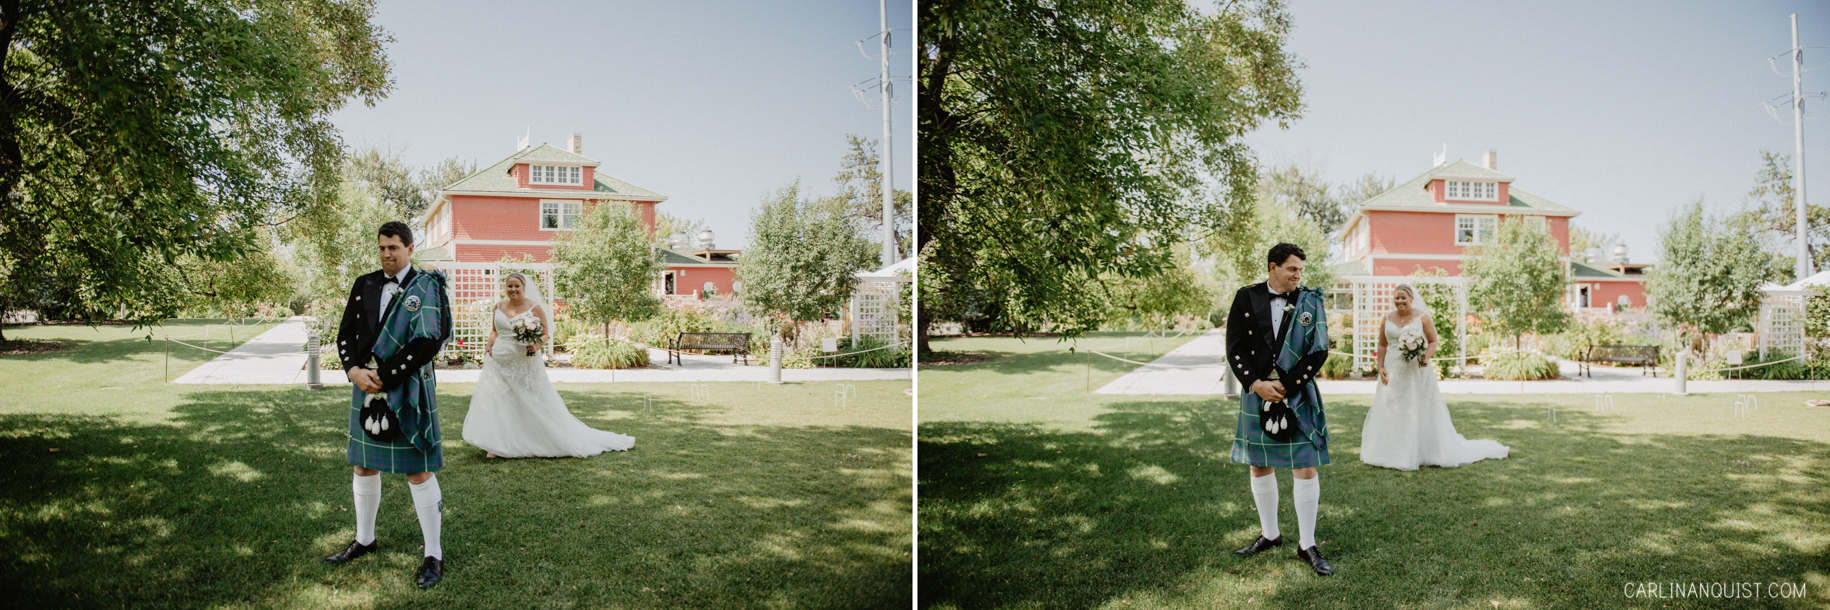 First Look at Deane House | Calgary Wedding Photographer